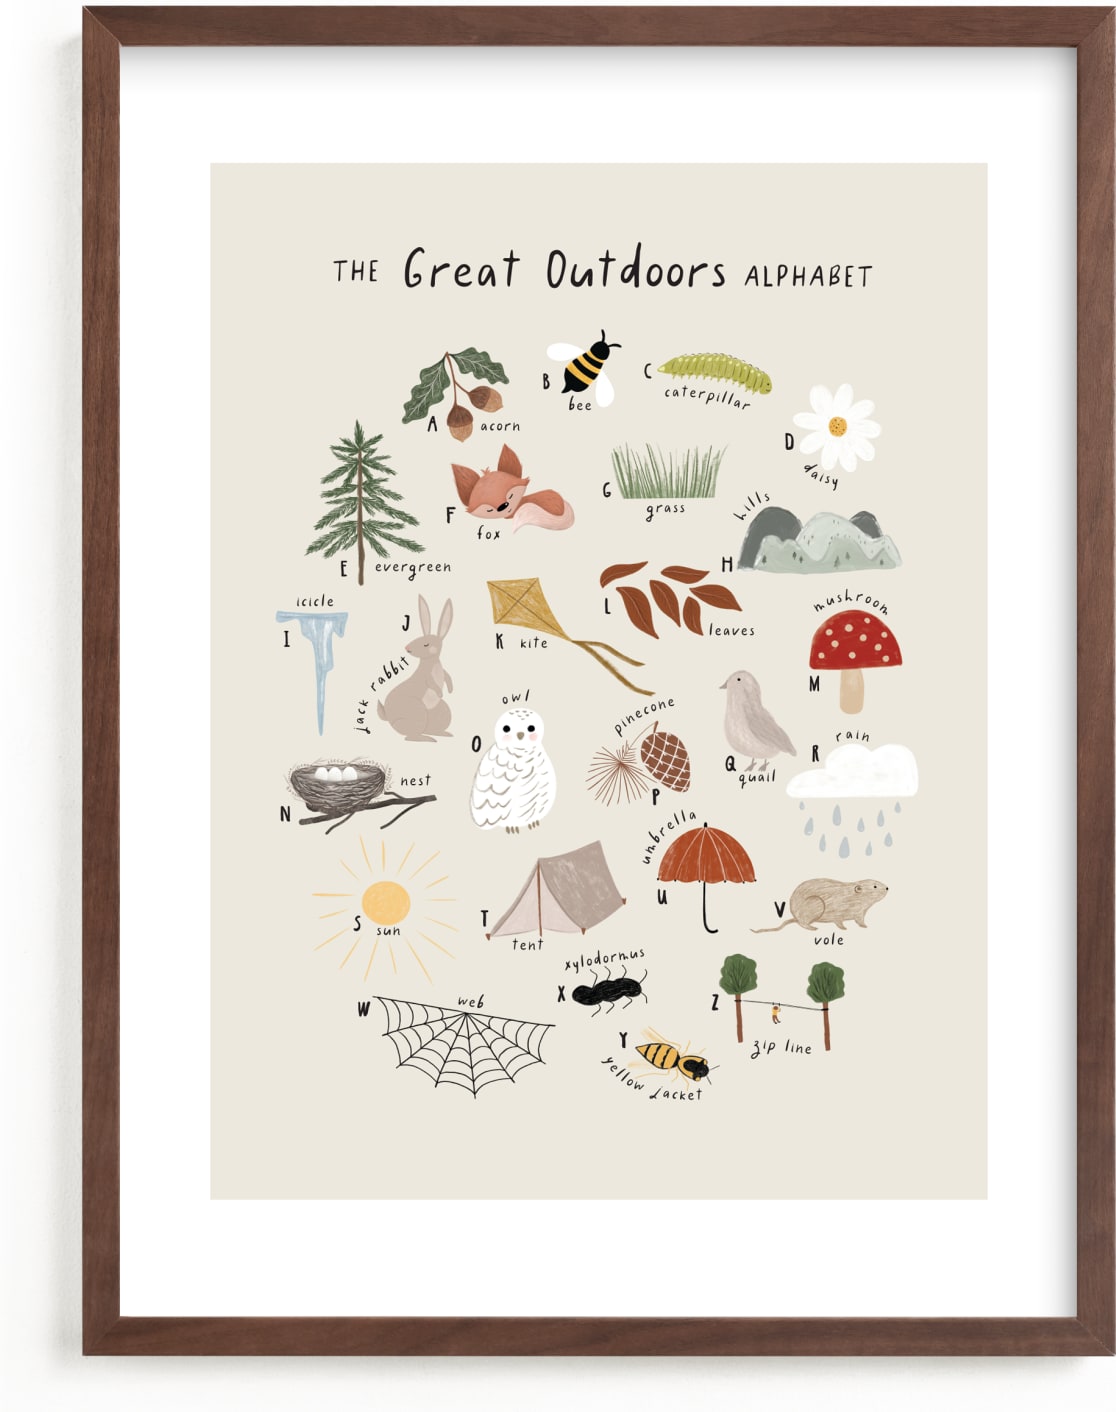 This is a brown, white, beige art by Maja Cunningham called The great outdoors alphabet.